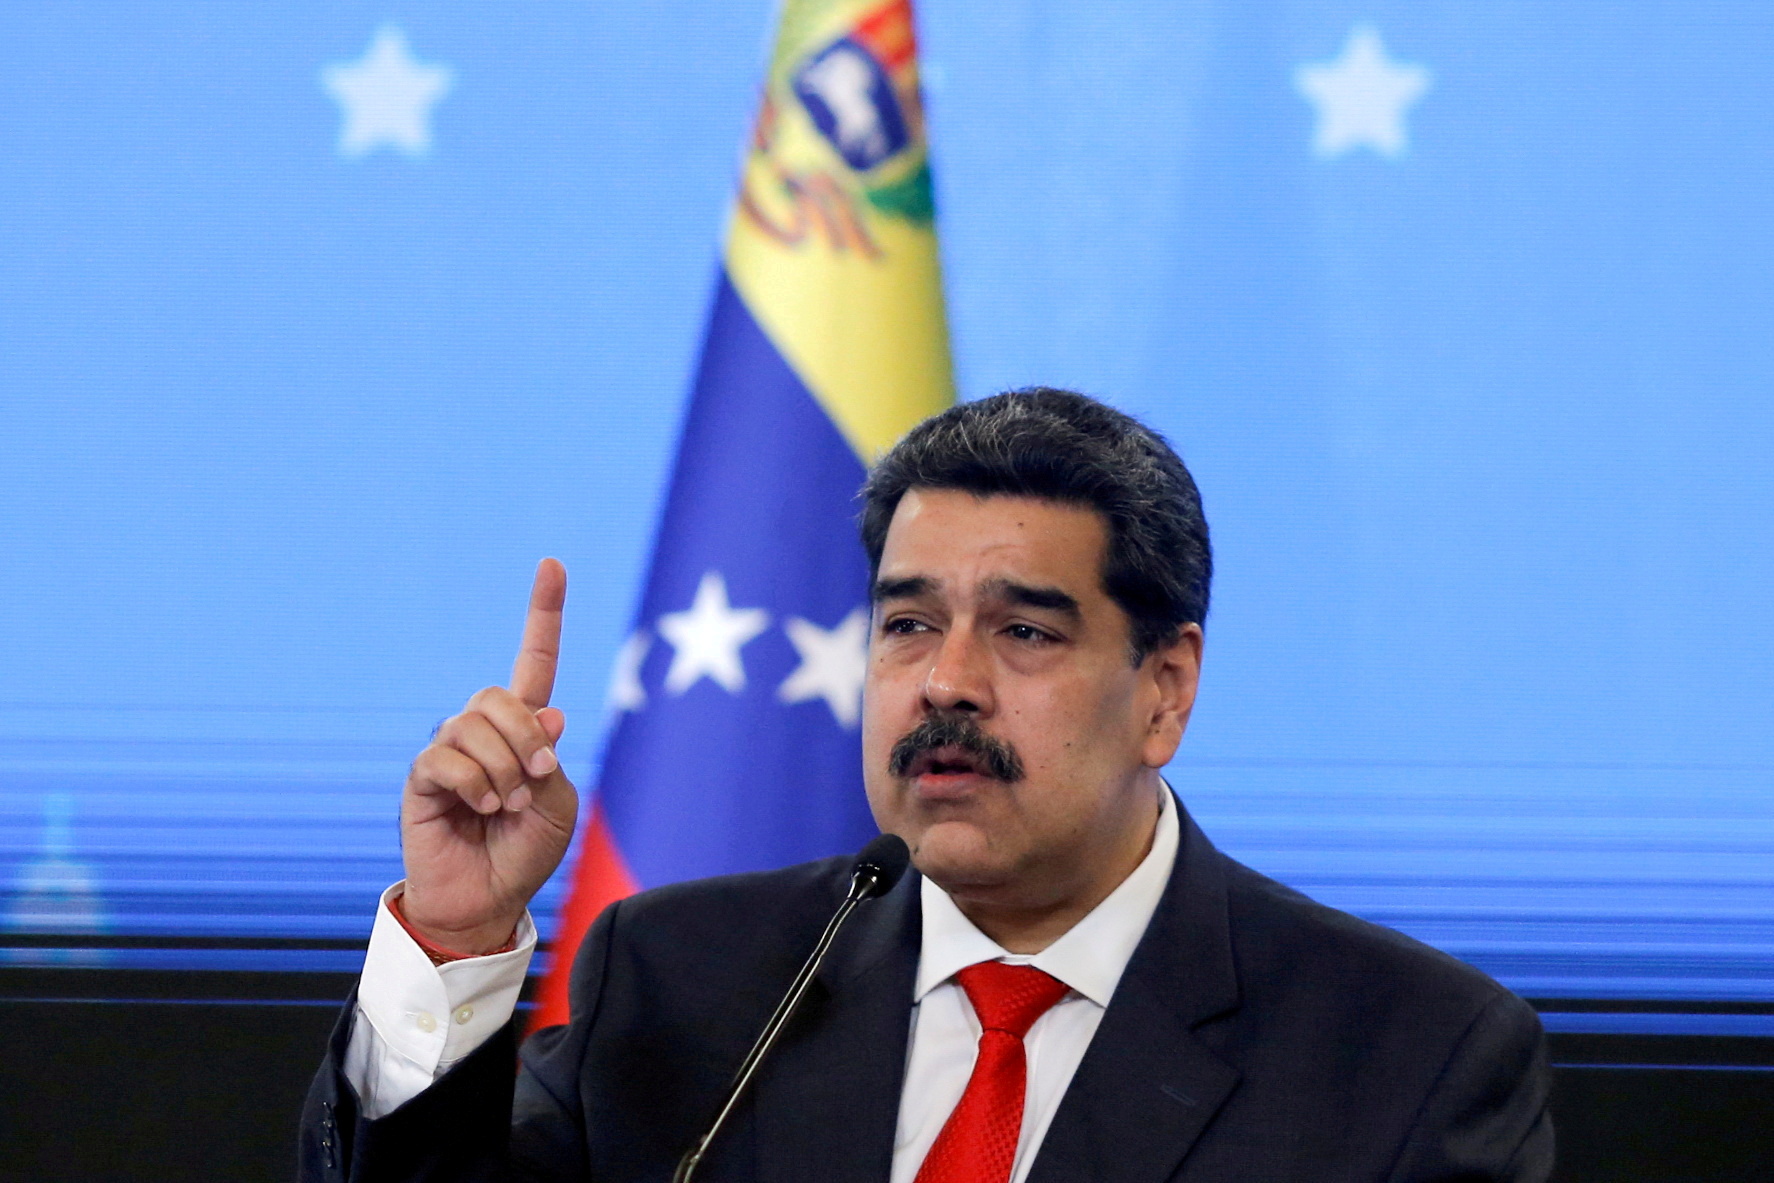 The announcement was made by the Venezuelan president on Thursday, indicating that the decision is based on the fact that some of the cabinet members are candidates for the November 21 elections